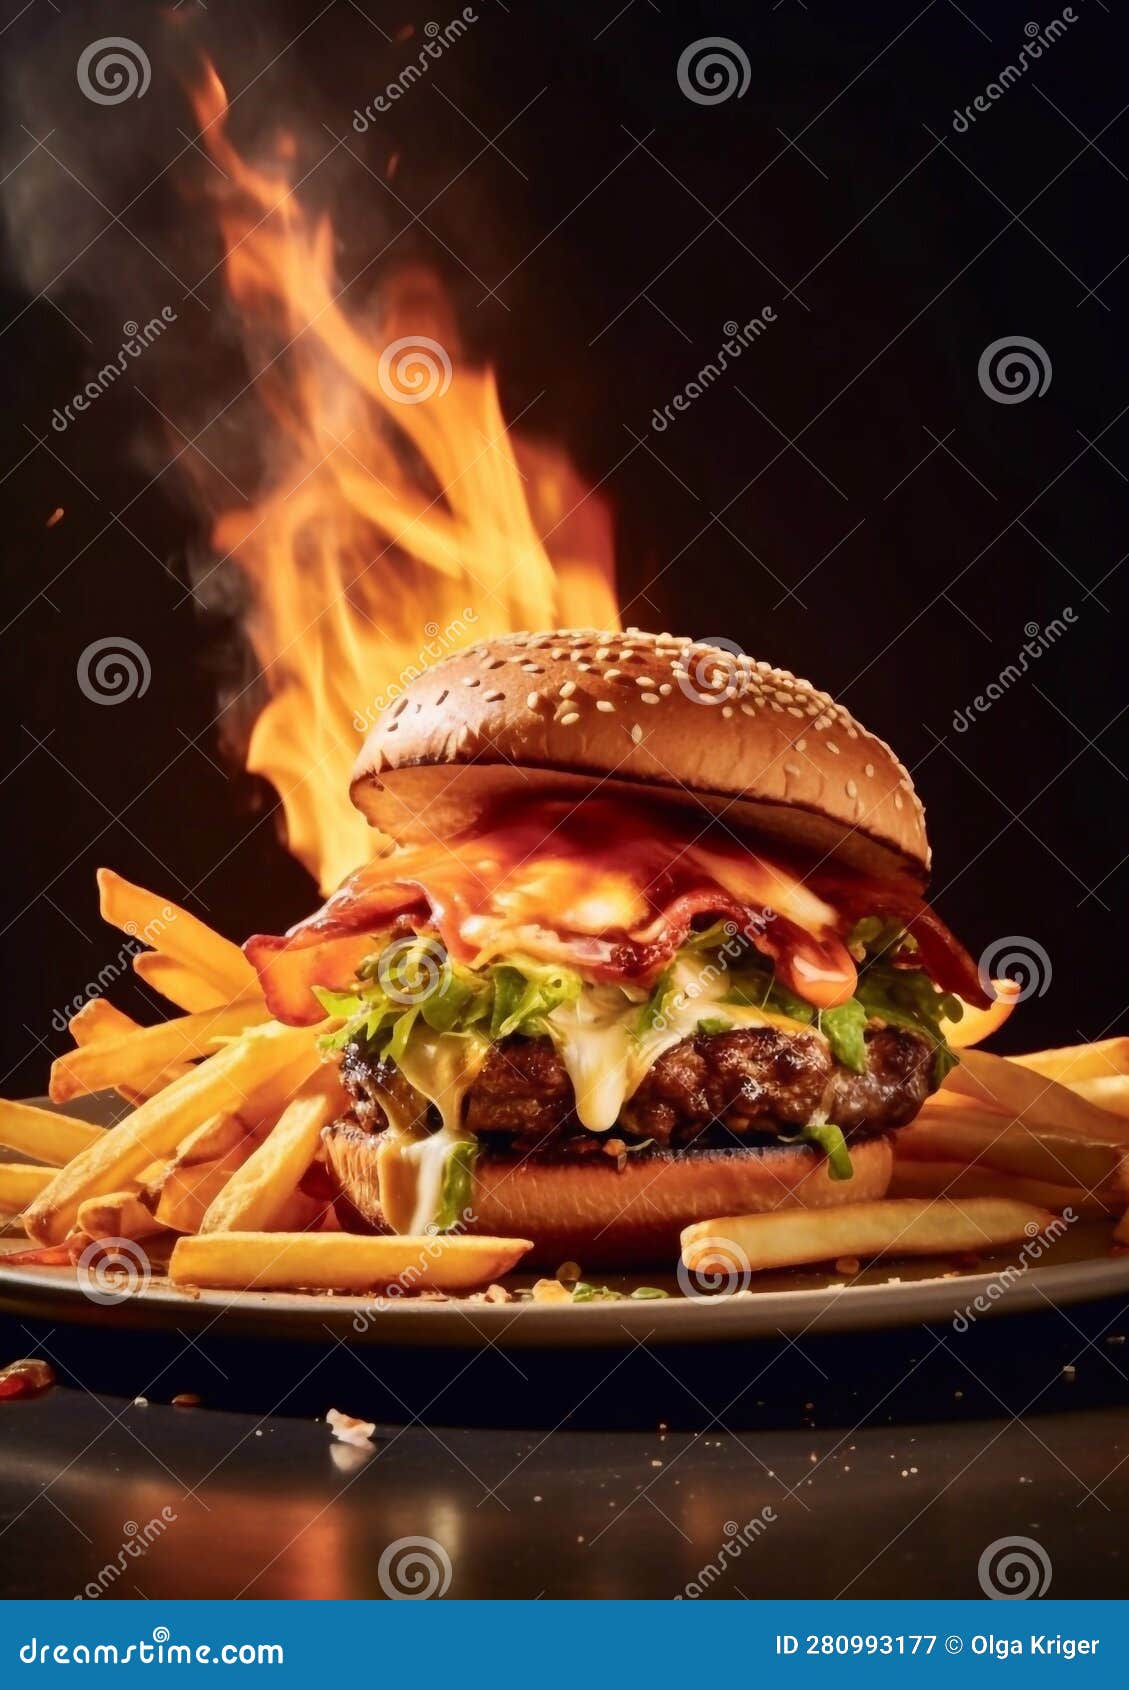 Sloppy Joe Burger with French Fries on a Plate Stock Illustration ...